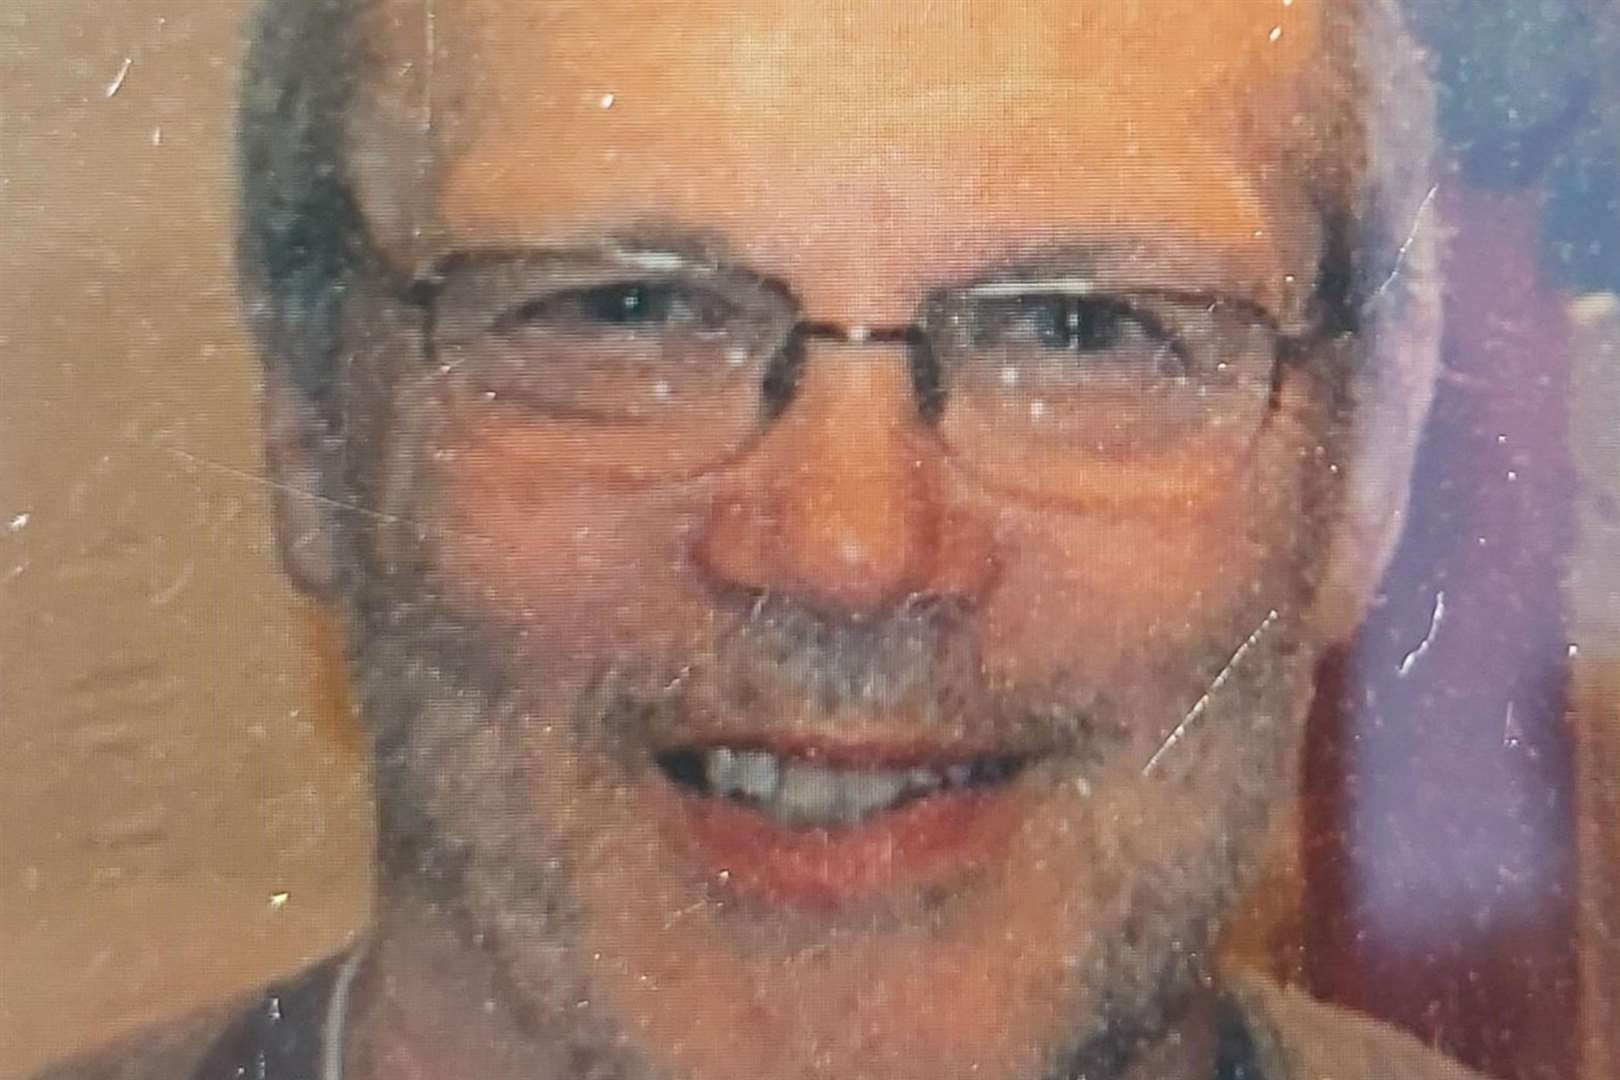 A body has been found in the search for Wayne Leppard. Photo: Kent Police